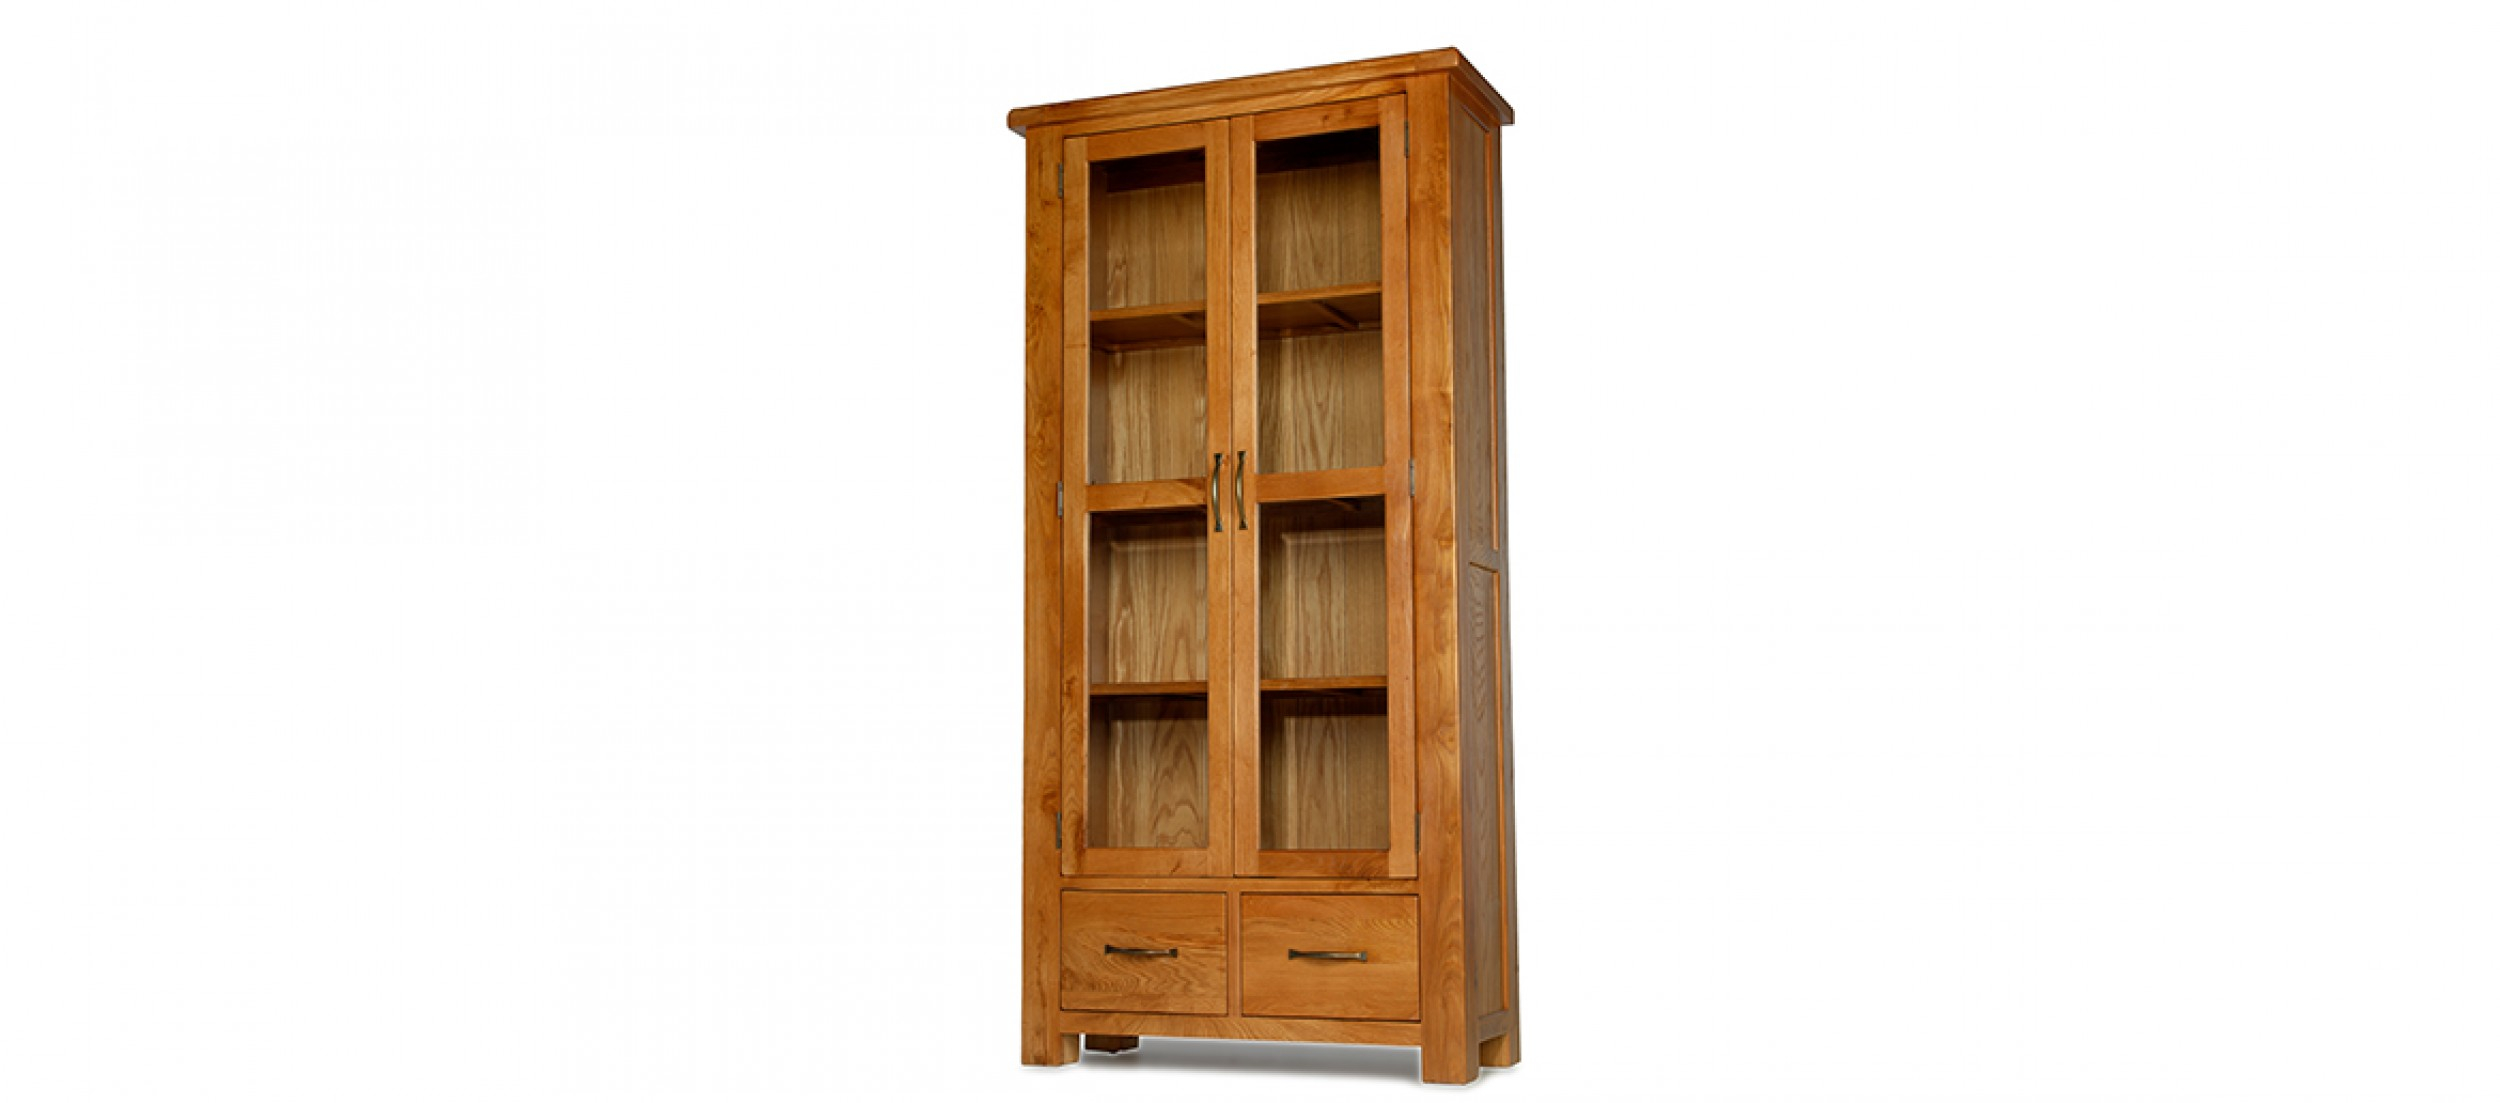 Barham Oak Glazed Display Cabinet Quercus Living intended for size 2500 X 1103